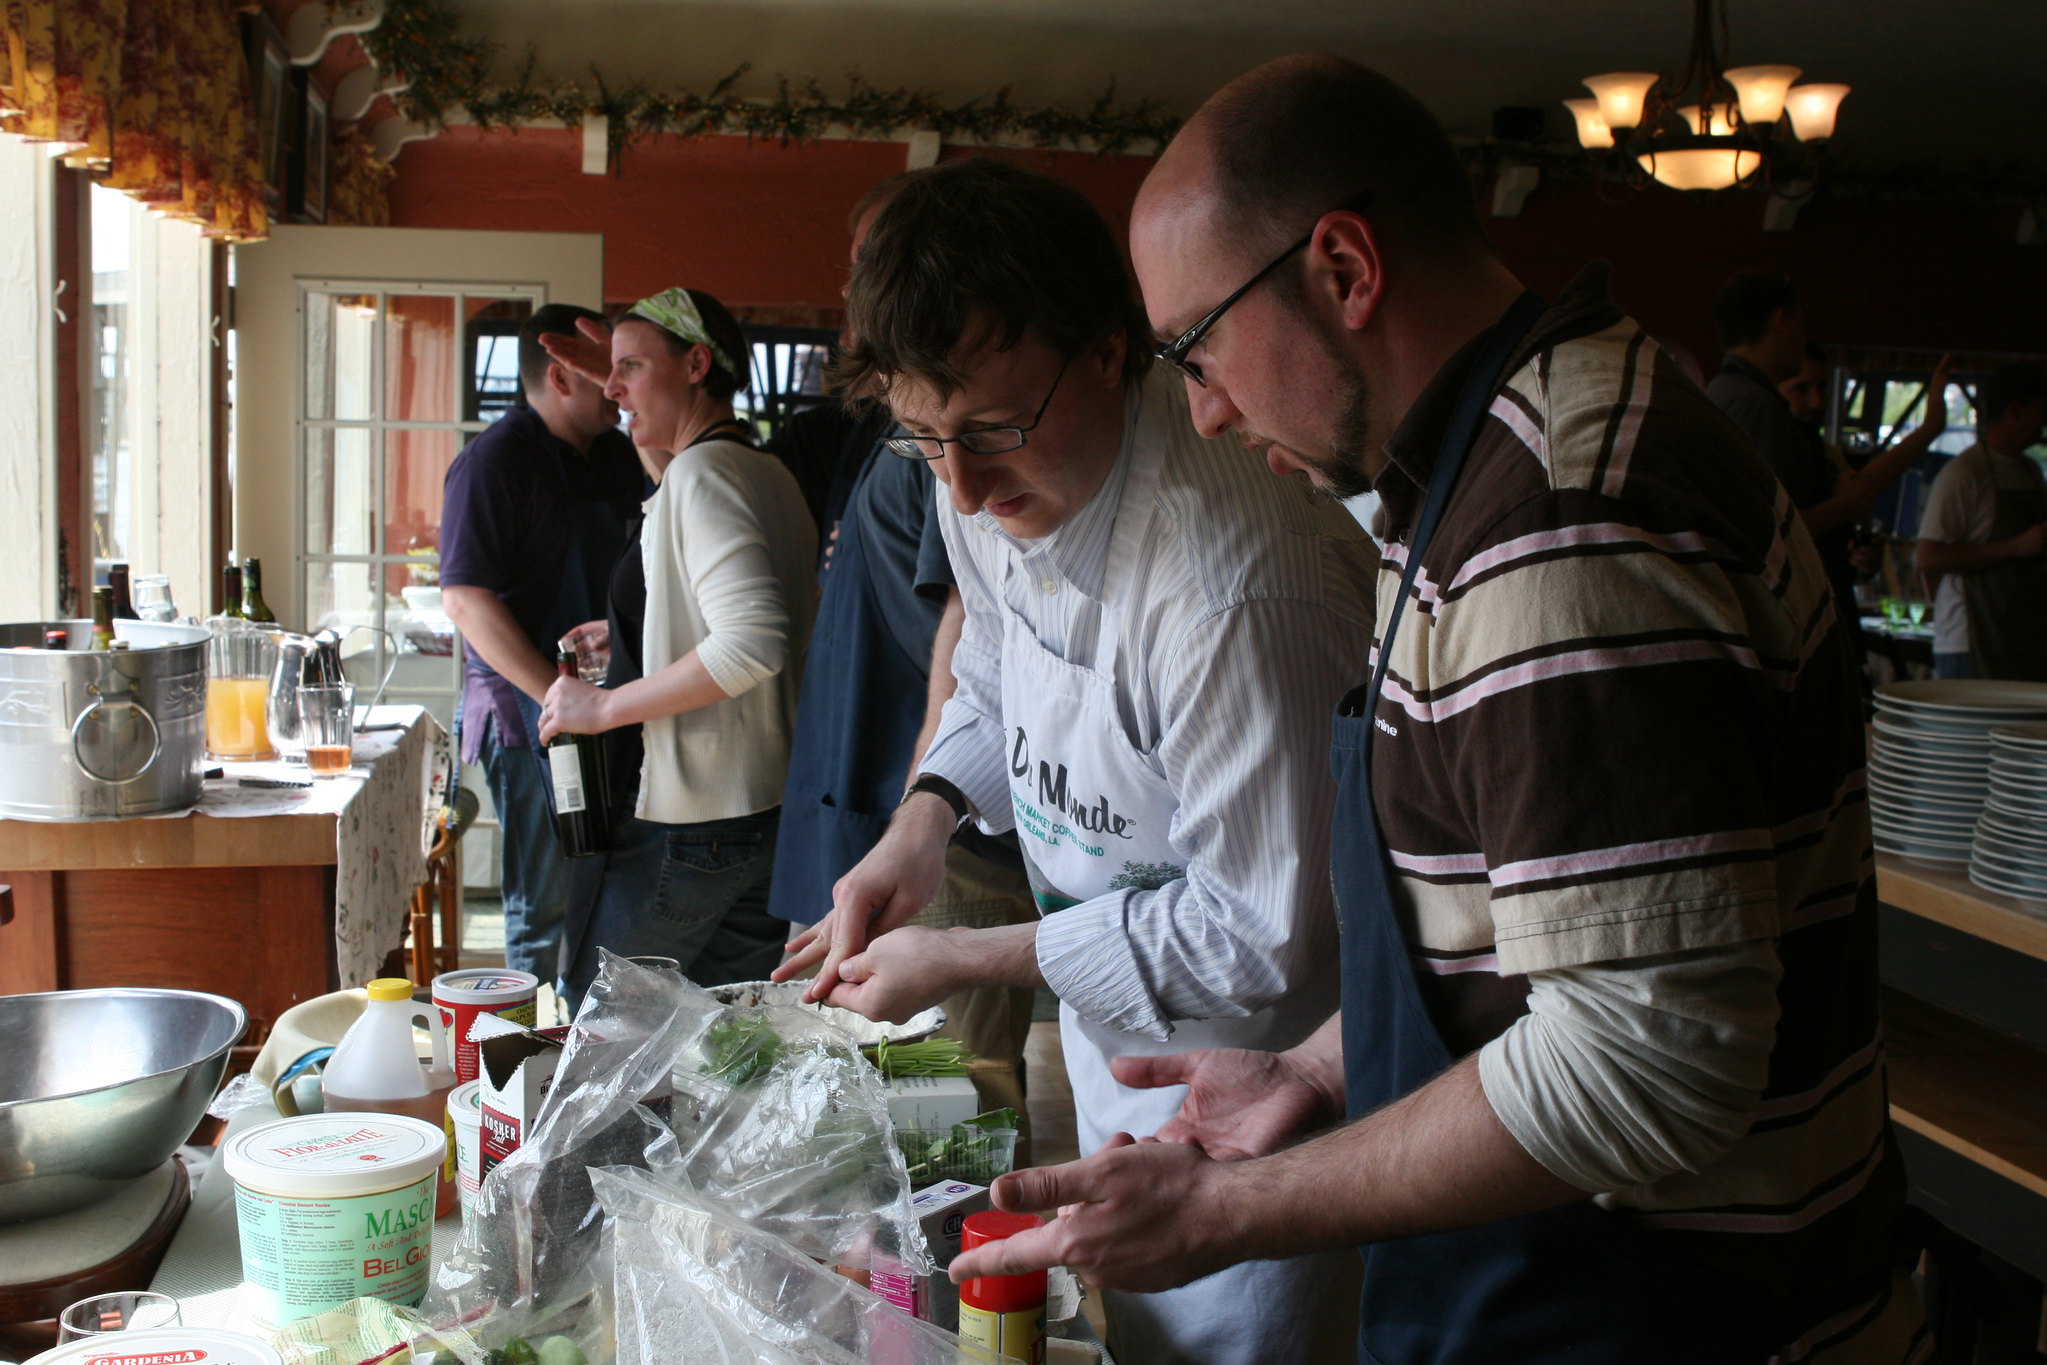 In a crowded kitchen two cooks stand over a counter counter full of ingredients.